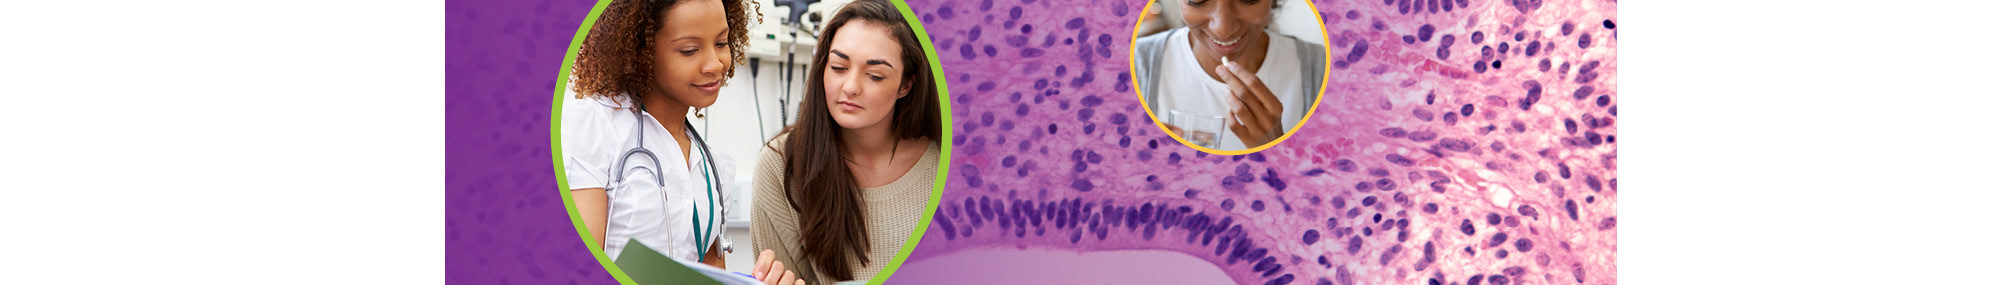 A series of three images relating endometriosis, including a woman talking to a healthcare provider (left), a woman taking medication (top right), and a microscope image of endometrial tissue (background). 